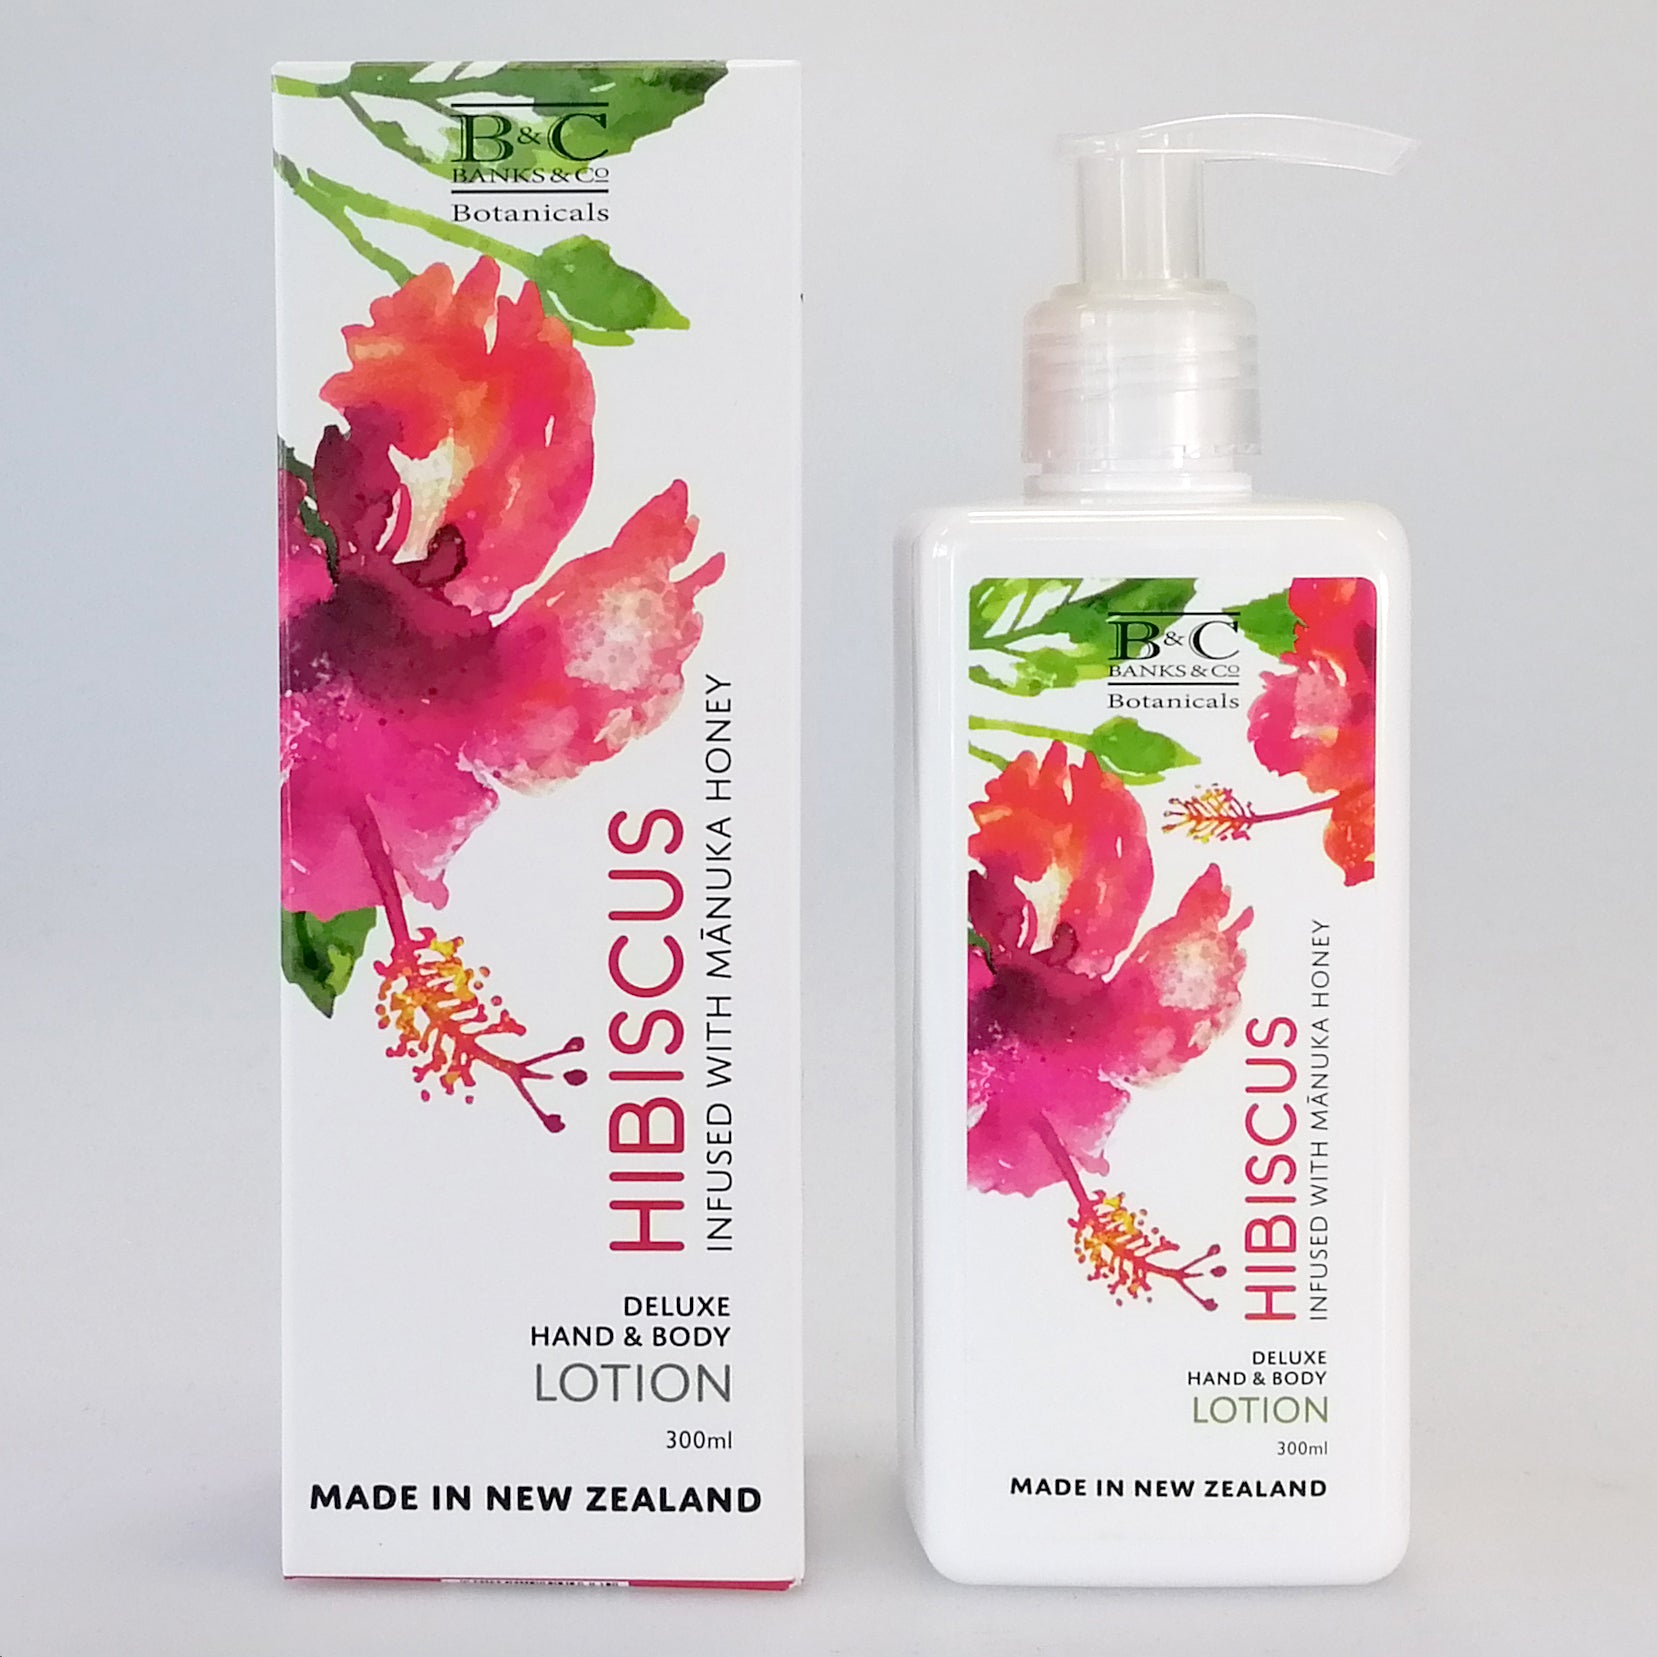 Banks & Co. Botanicals - Hibiscus - Hand & Body Lotion